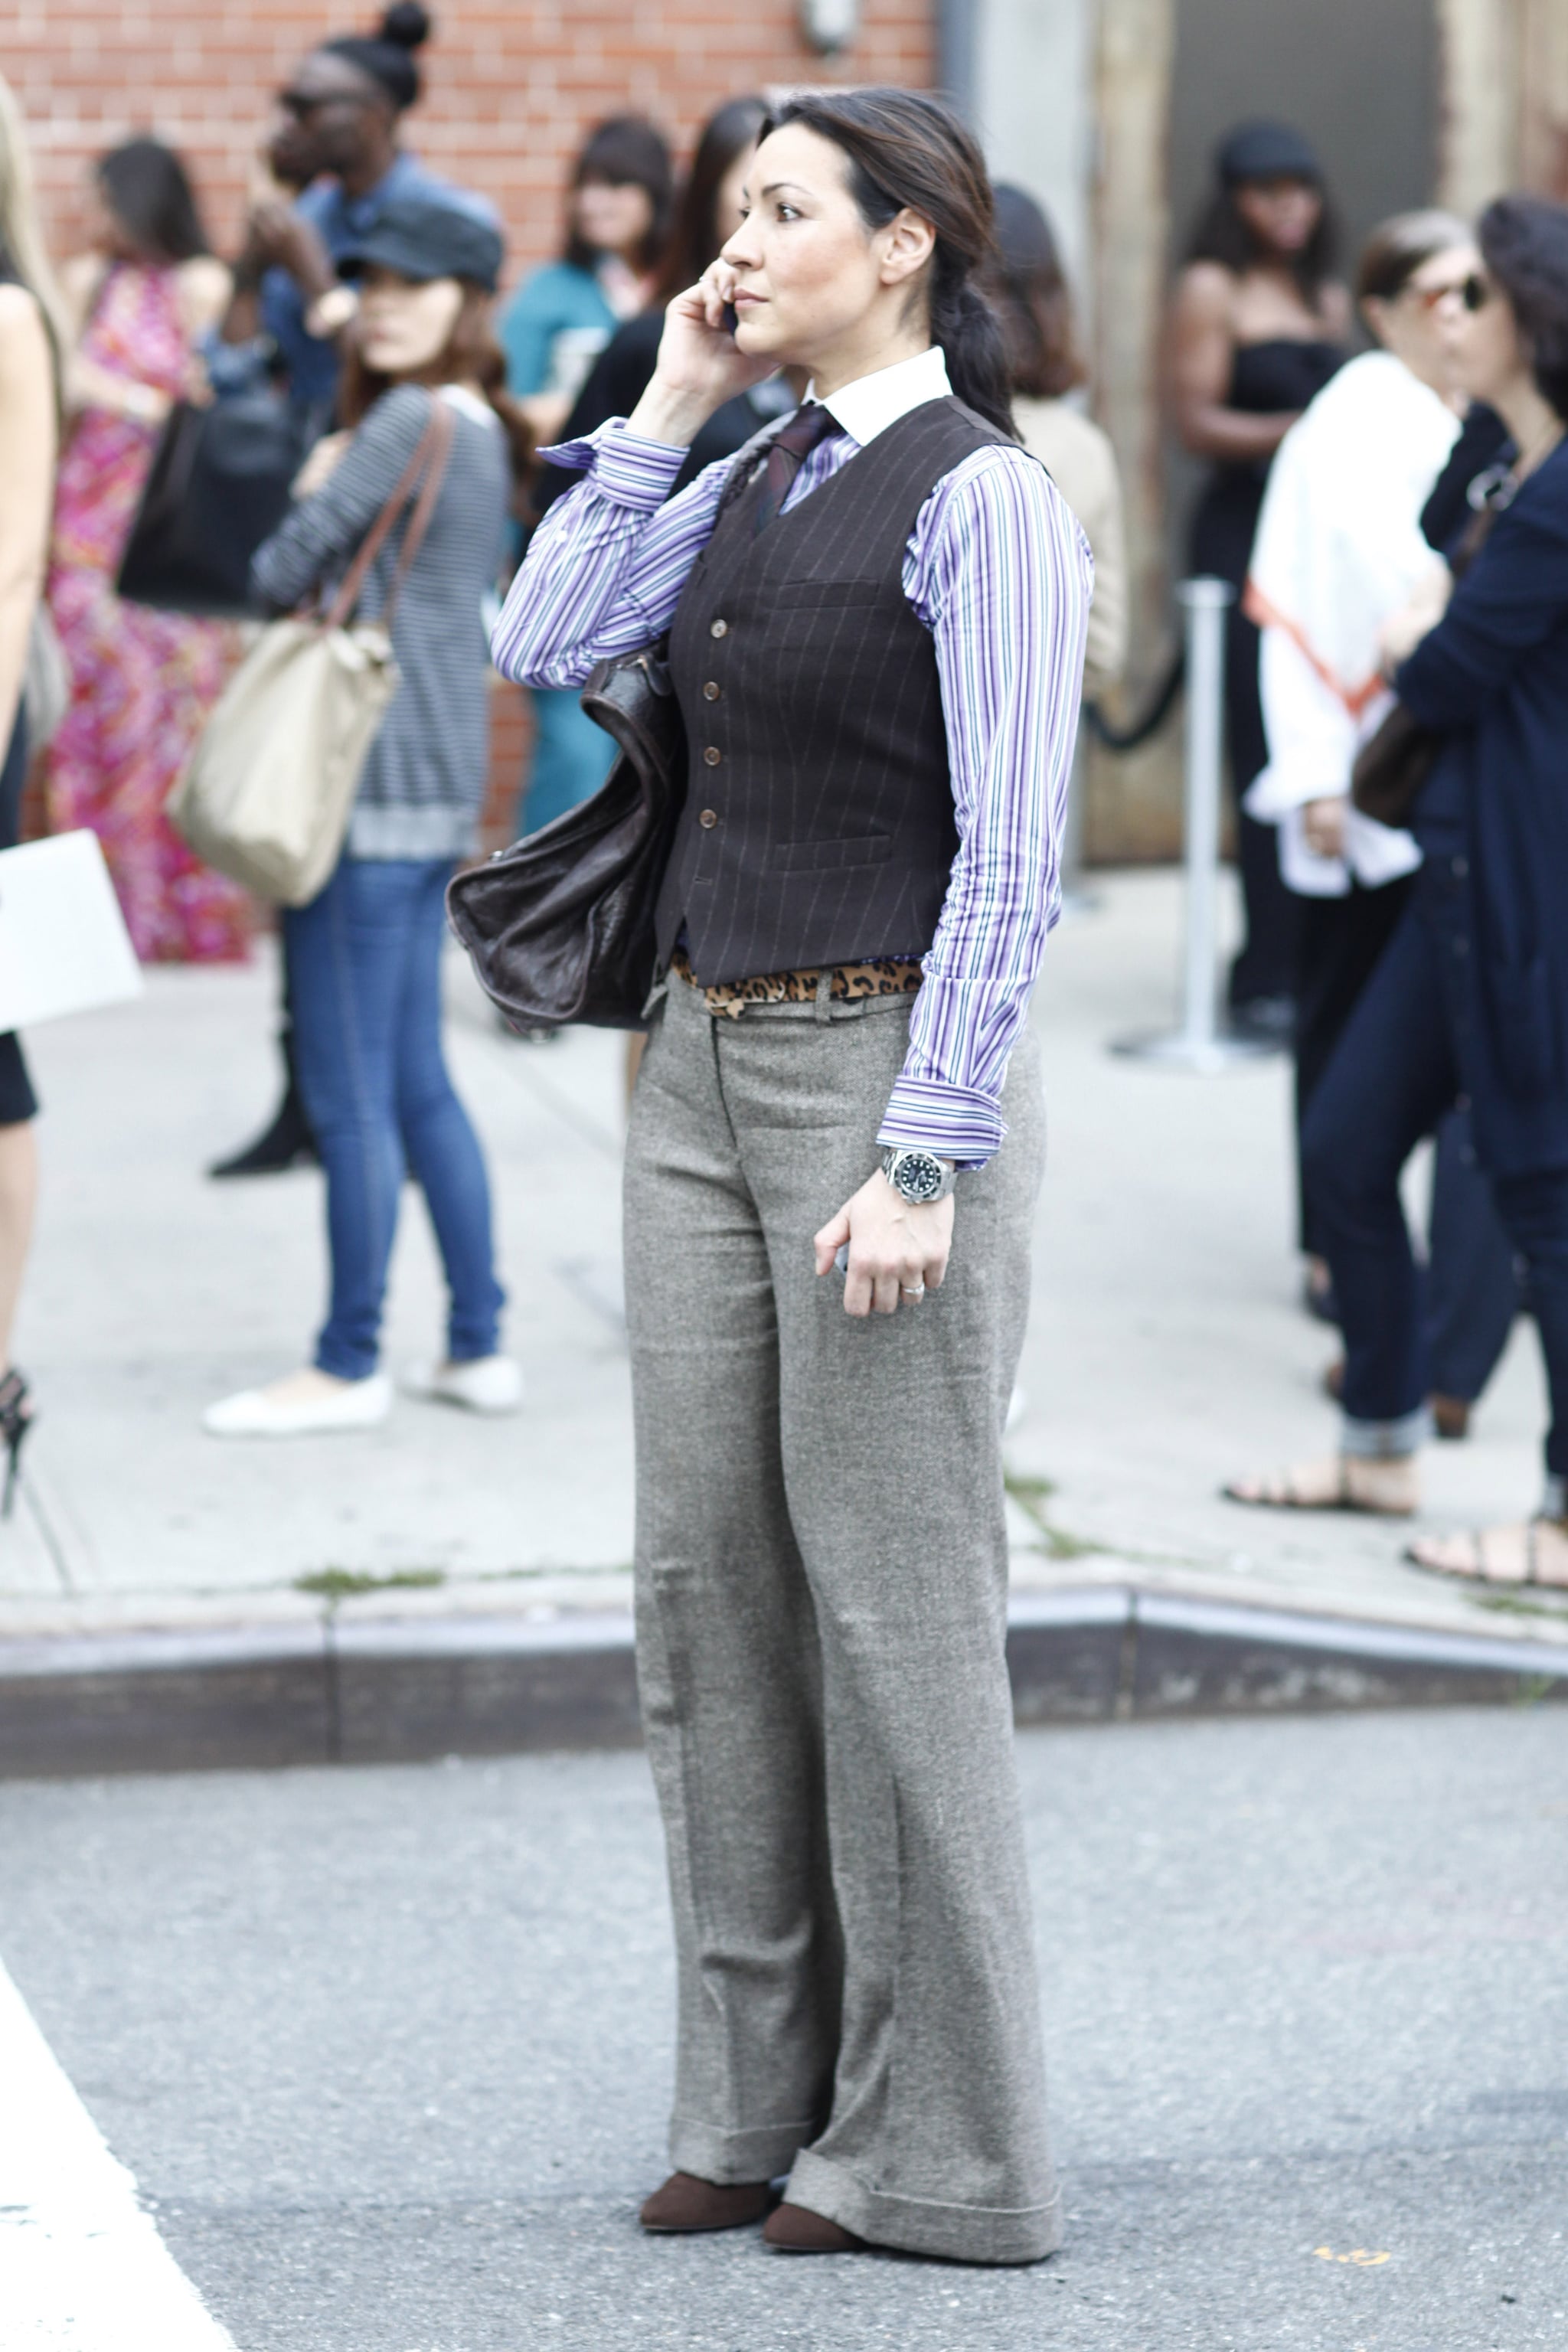 Some oldies Channeling-Diane-Keaton-Annie-Hall-look-tailored-menswear